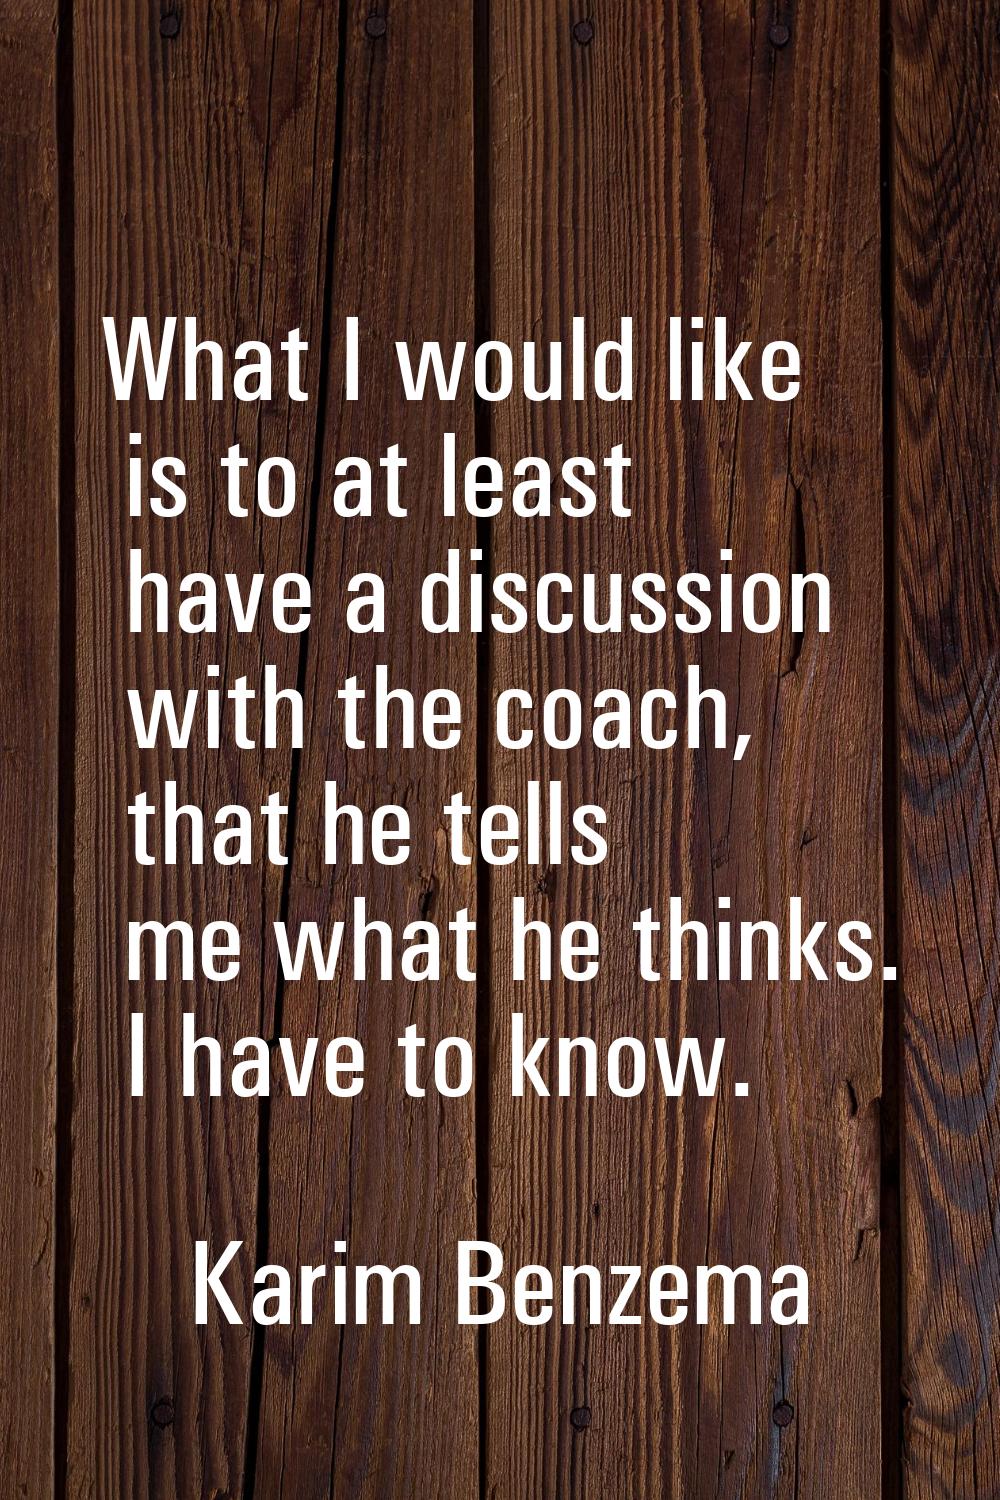 What I would like is to at least have a discussion with the coach, that he tells me what he thinks.